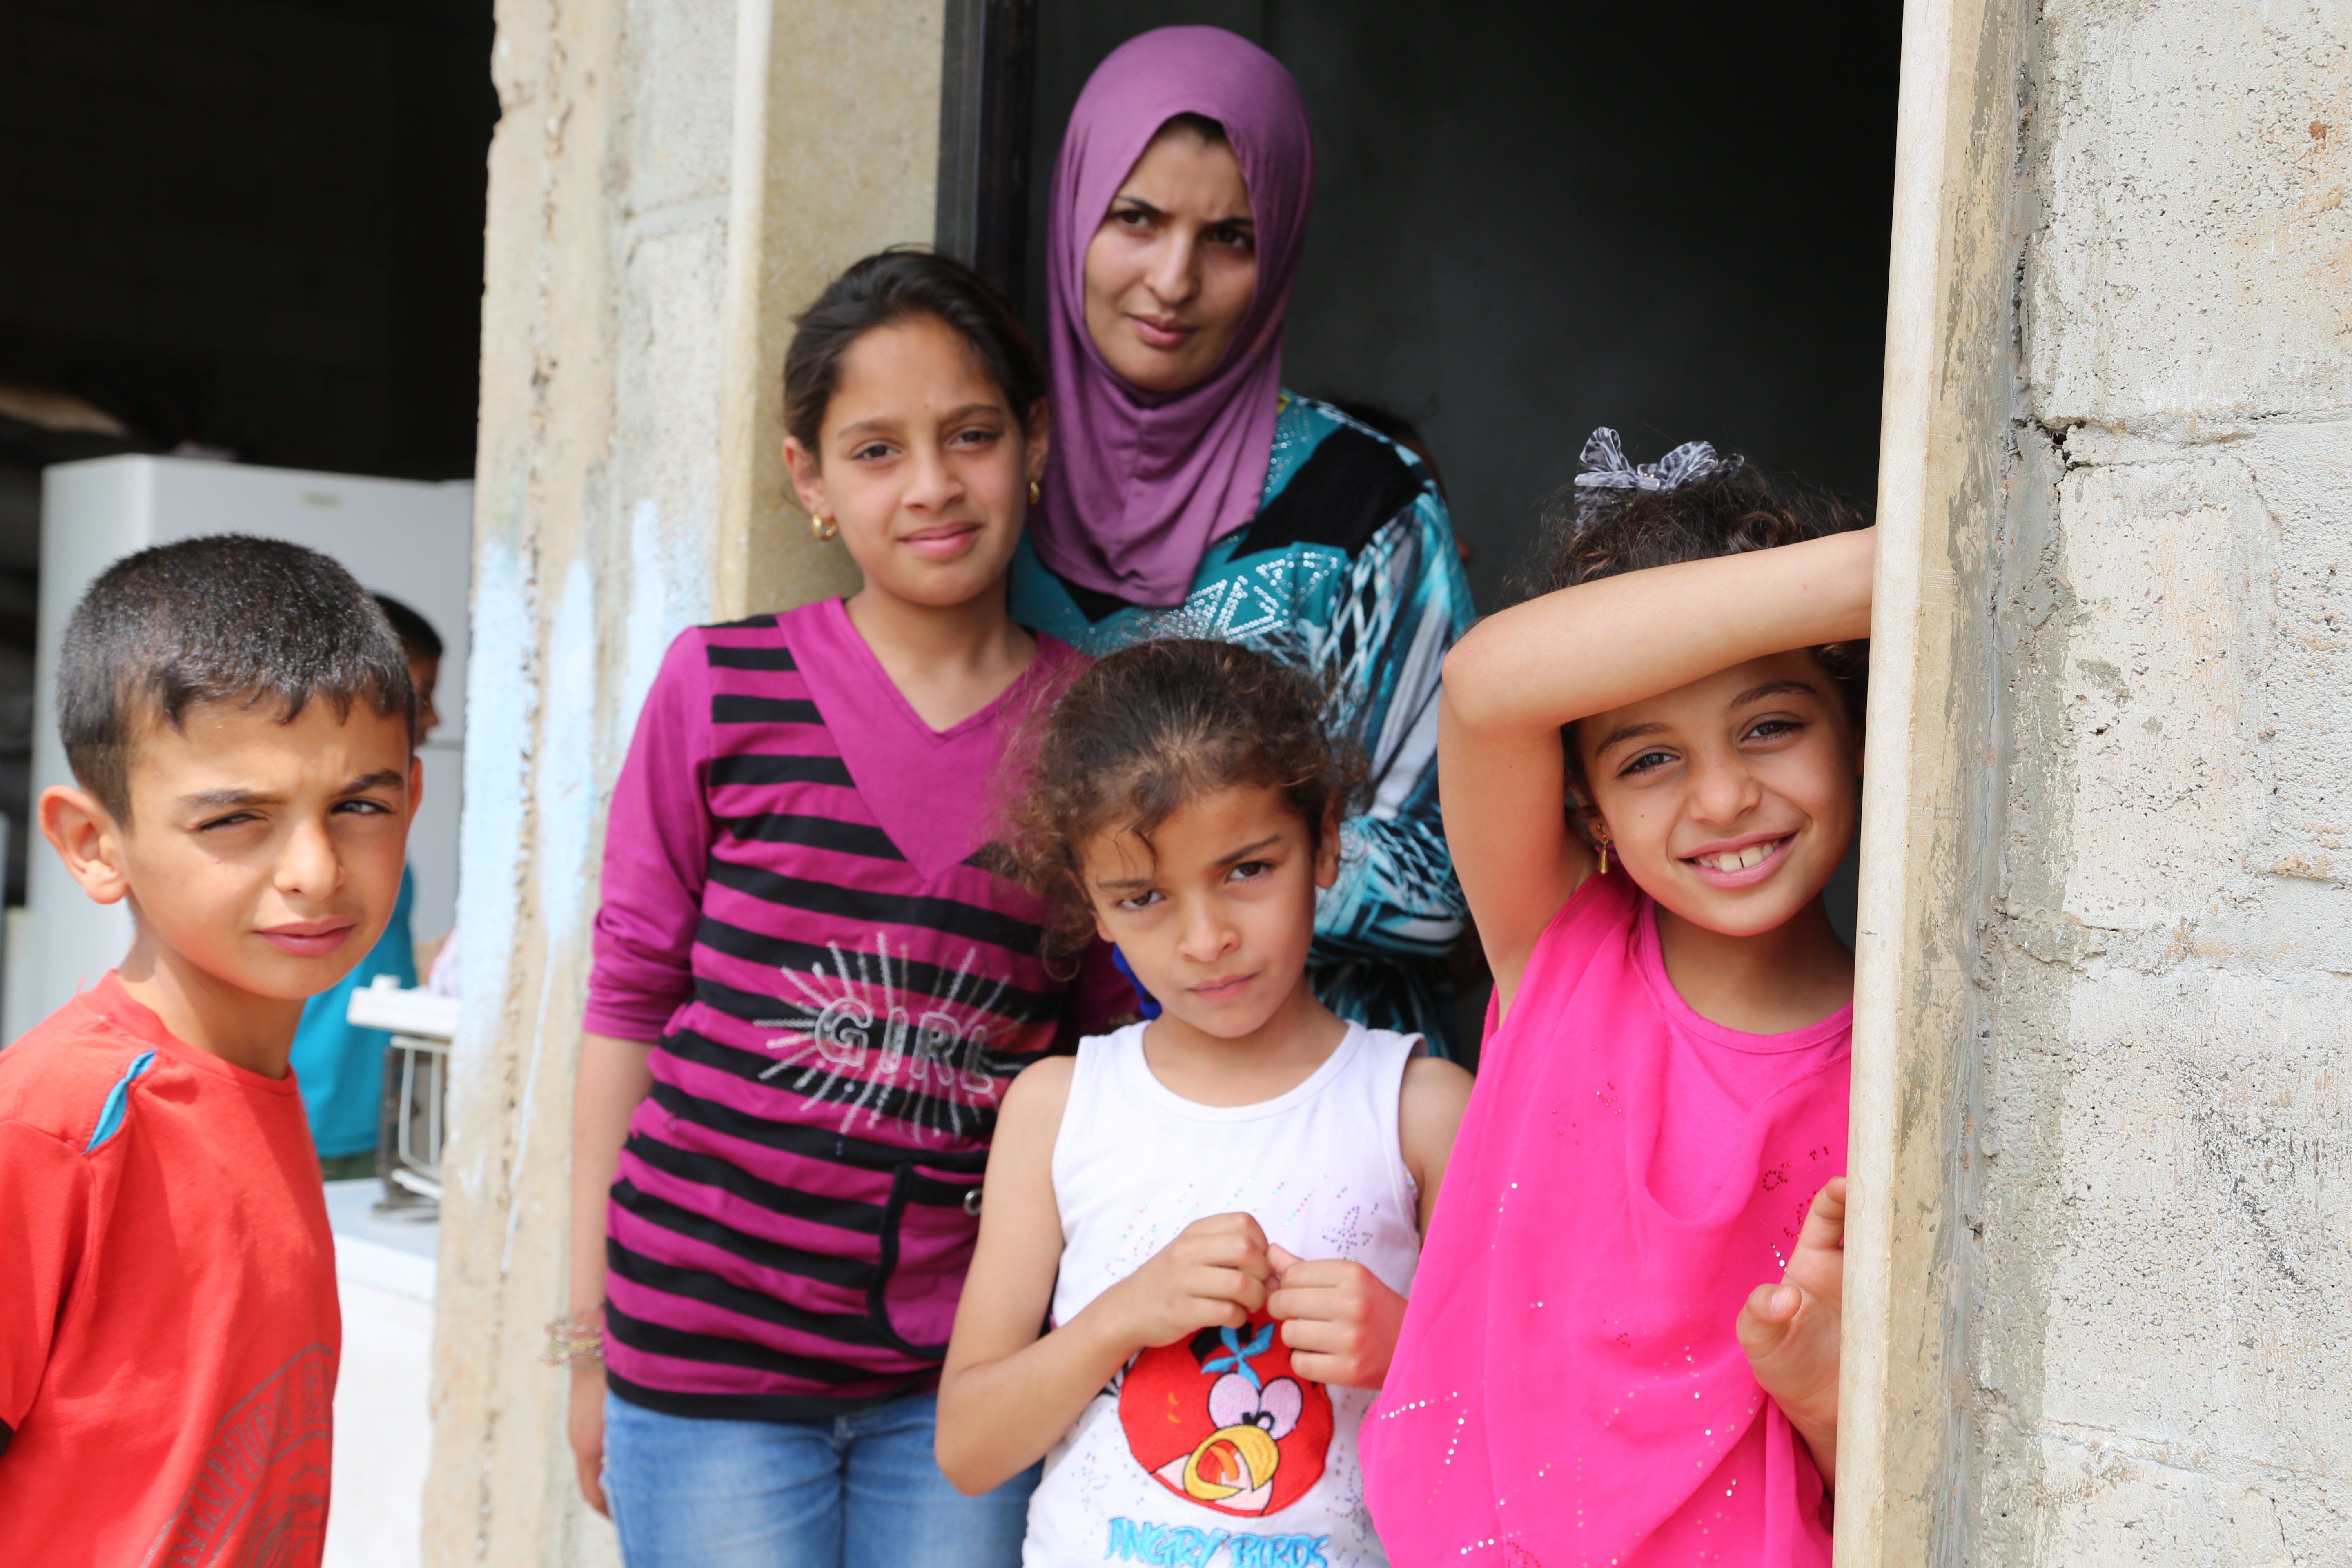 Fatmeh, a 26-year old Syrian refugee mother and her children in Wadi Khaled in North Lebanon